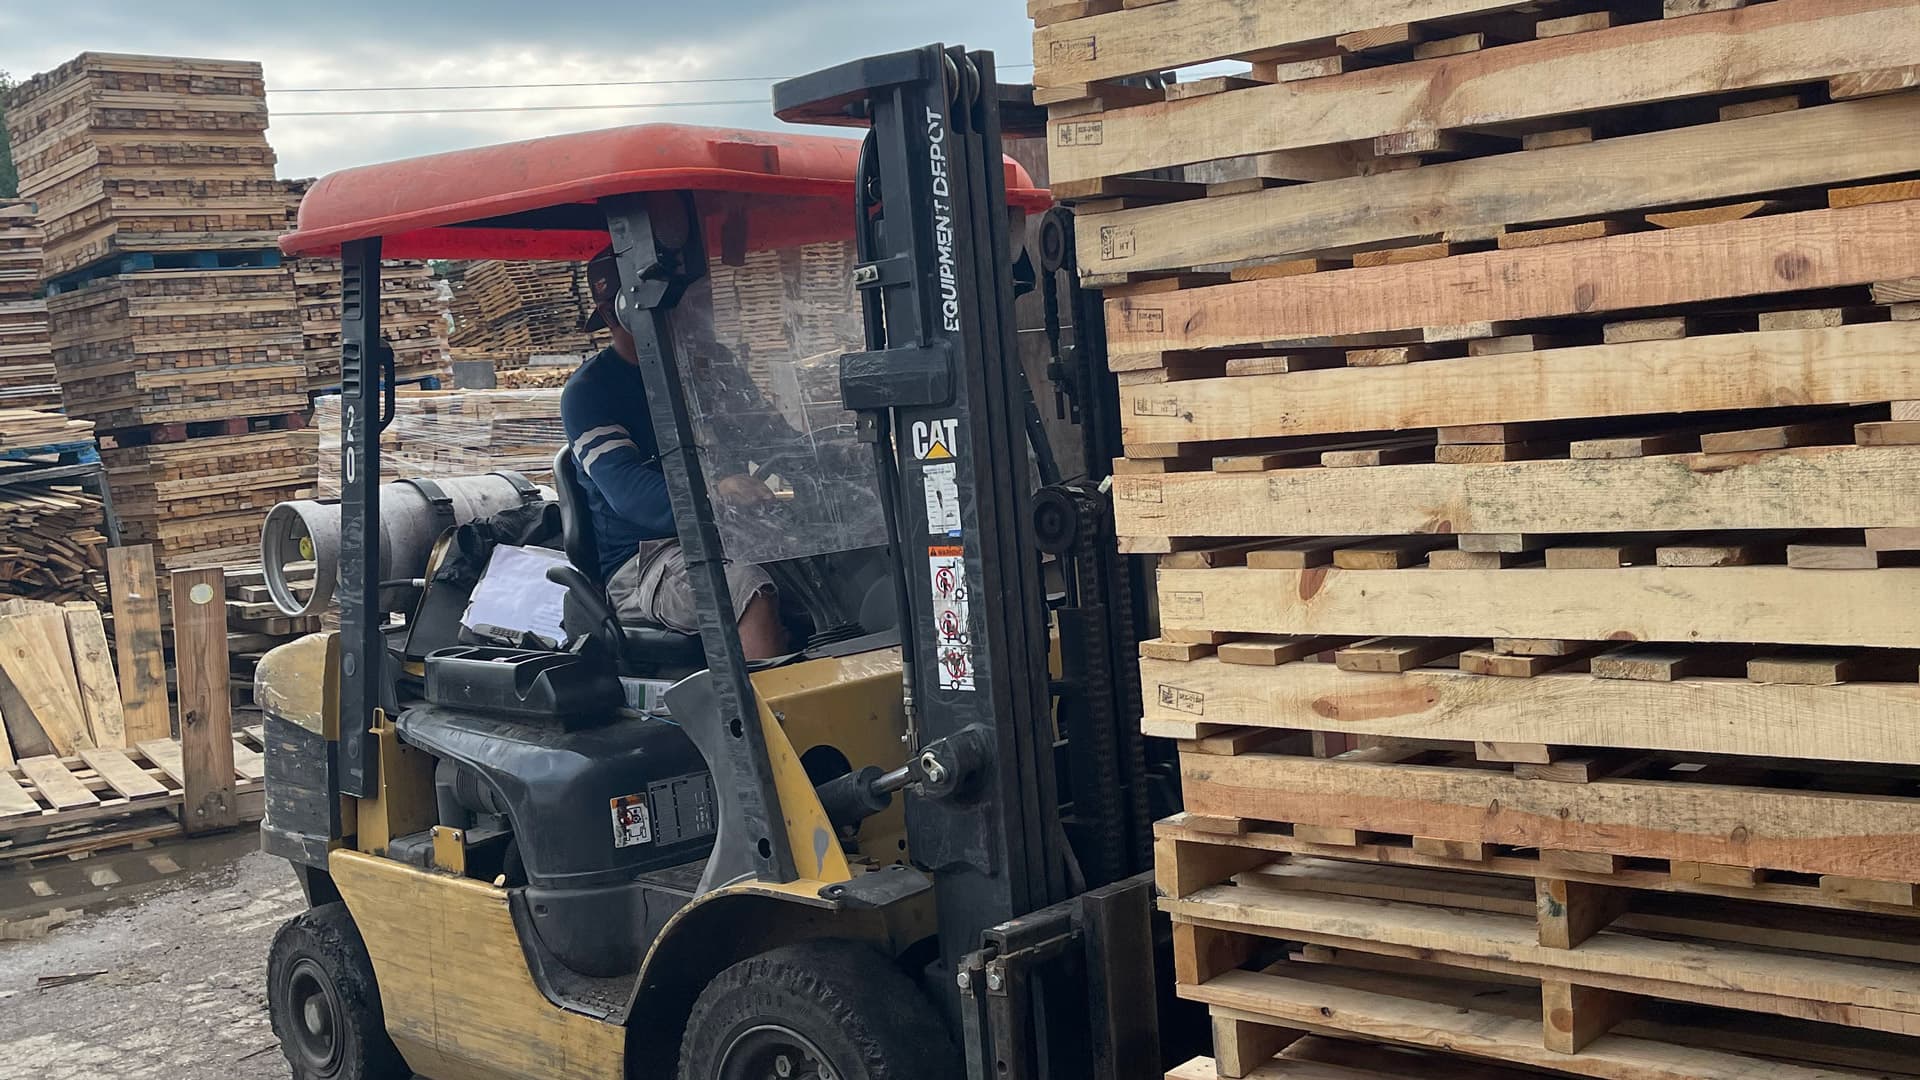 Strength and durability of remanufactured pallets